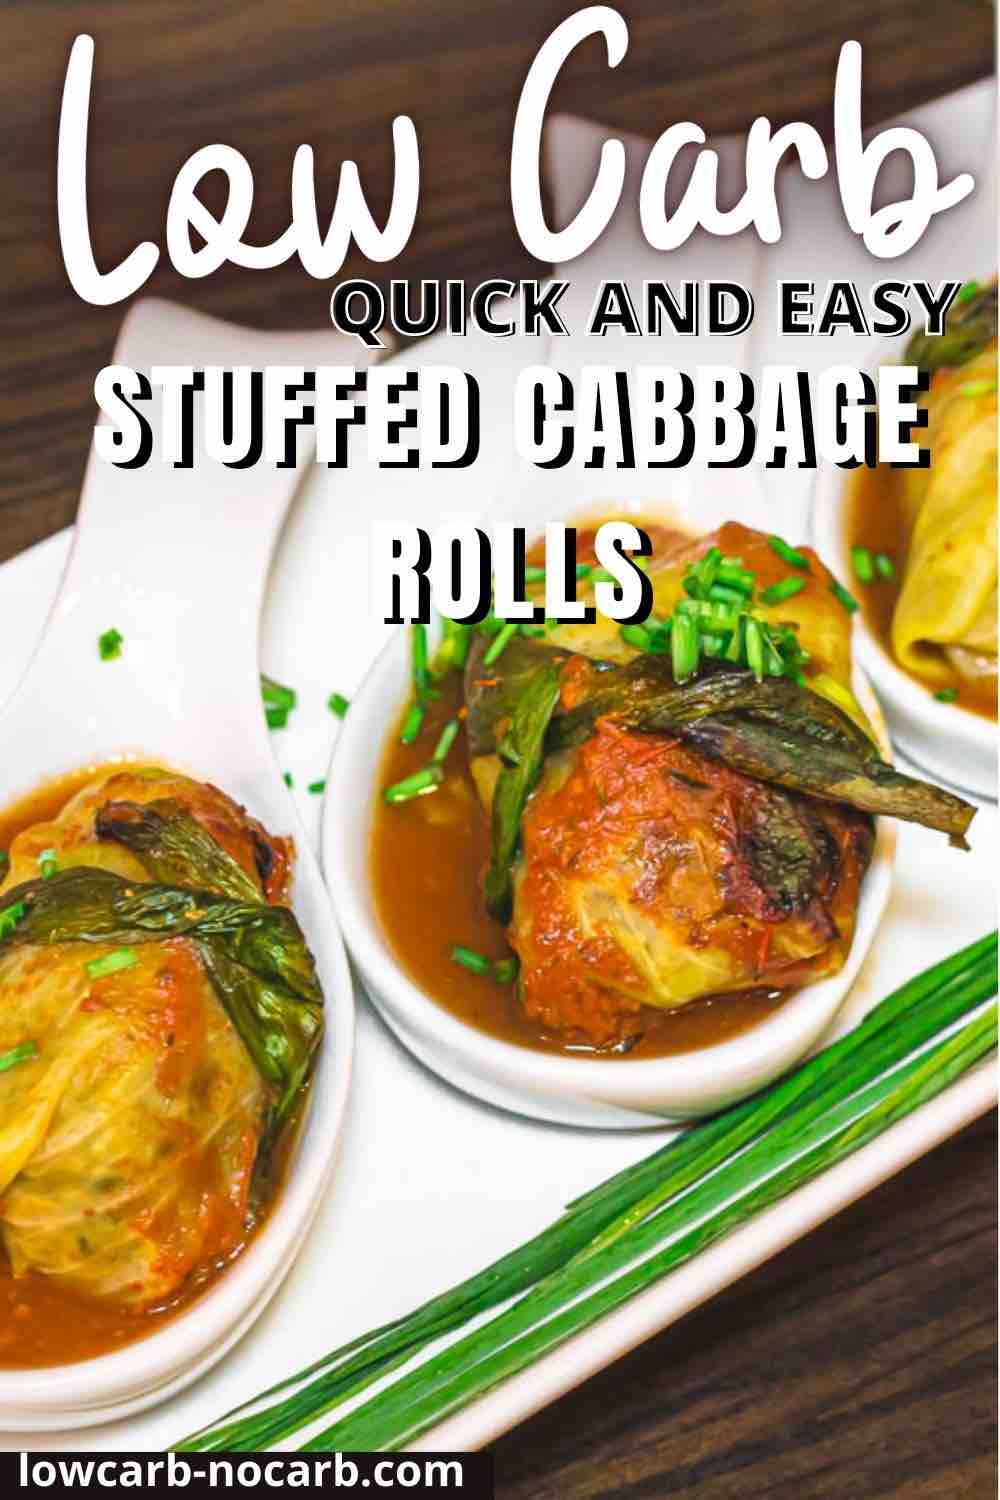 Low carb stuffed cabbage rolls.